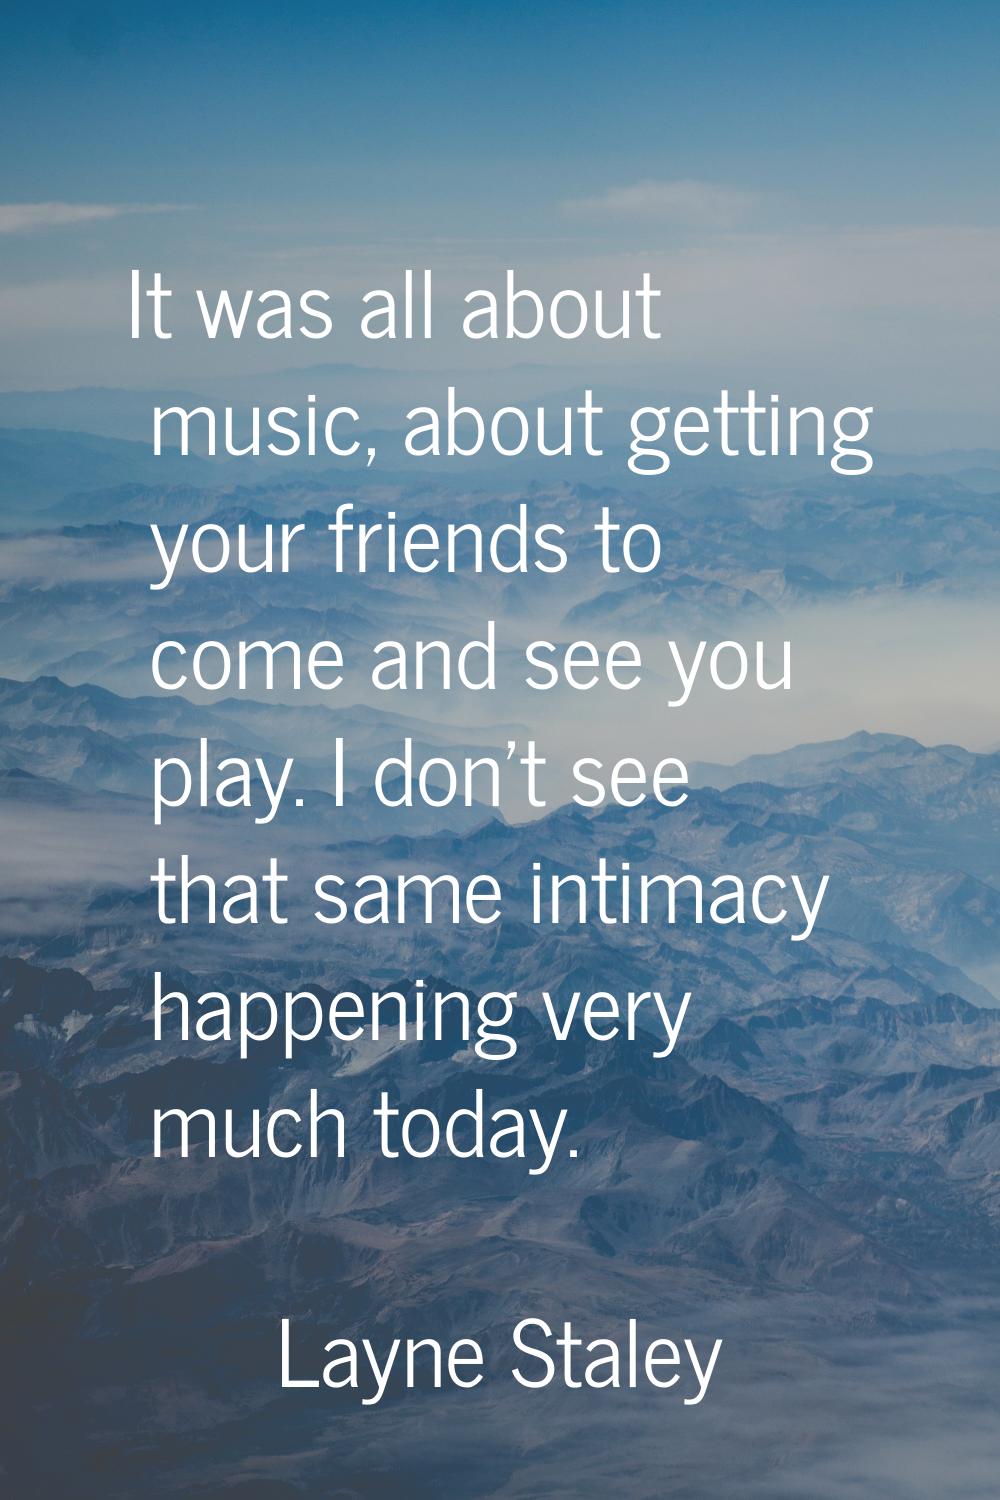 It was all about music, about getting your friends to come and see you play. I don't see that same 